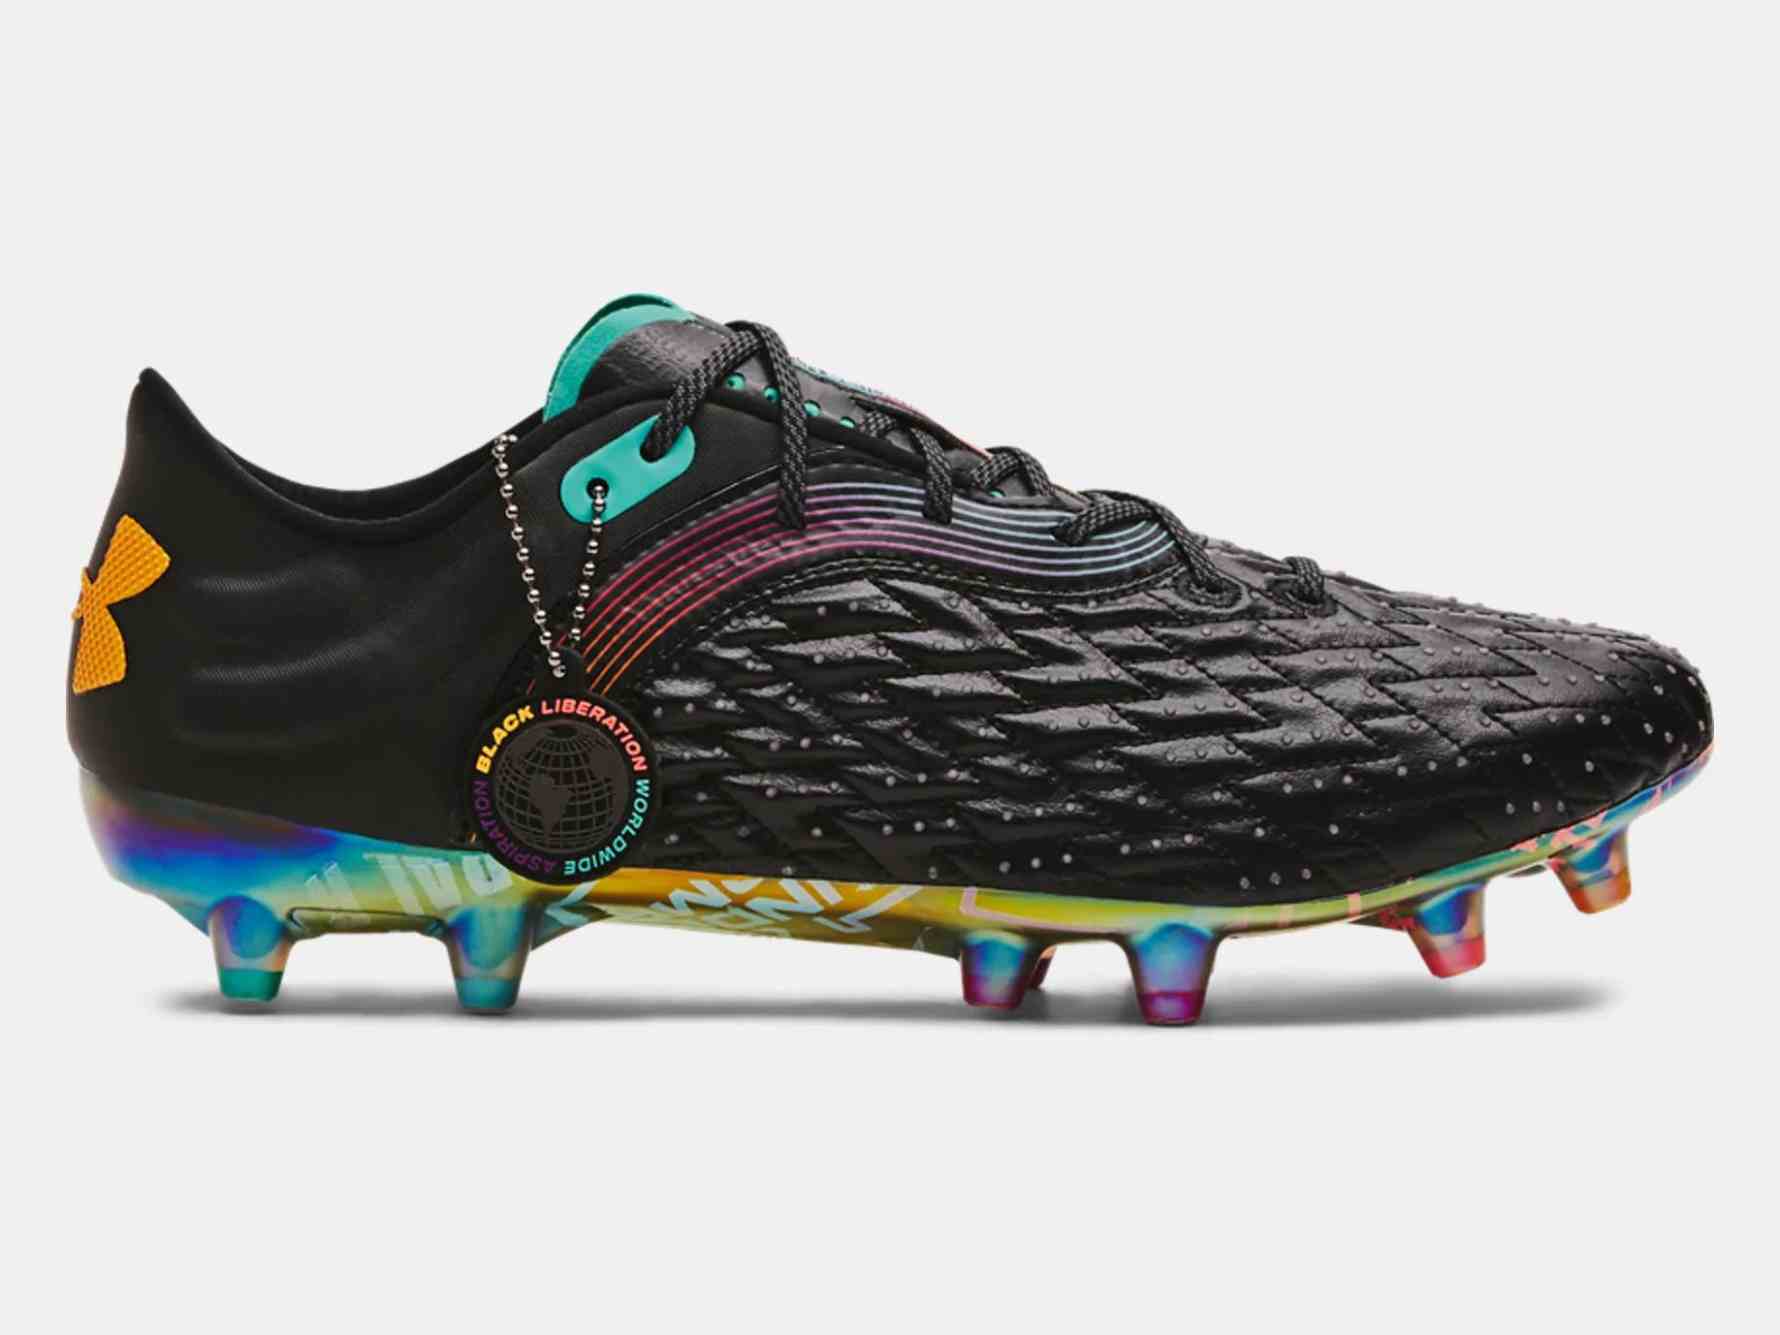 The best features of new Under Armour x Black History Month special edition boots